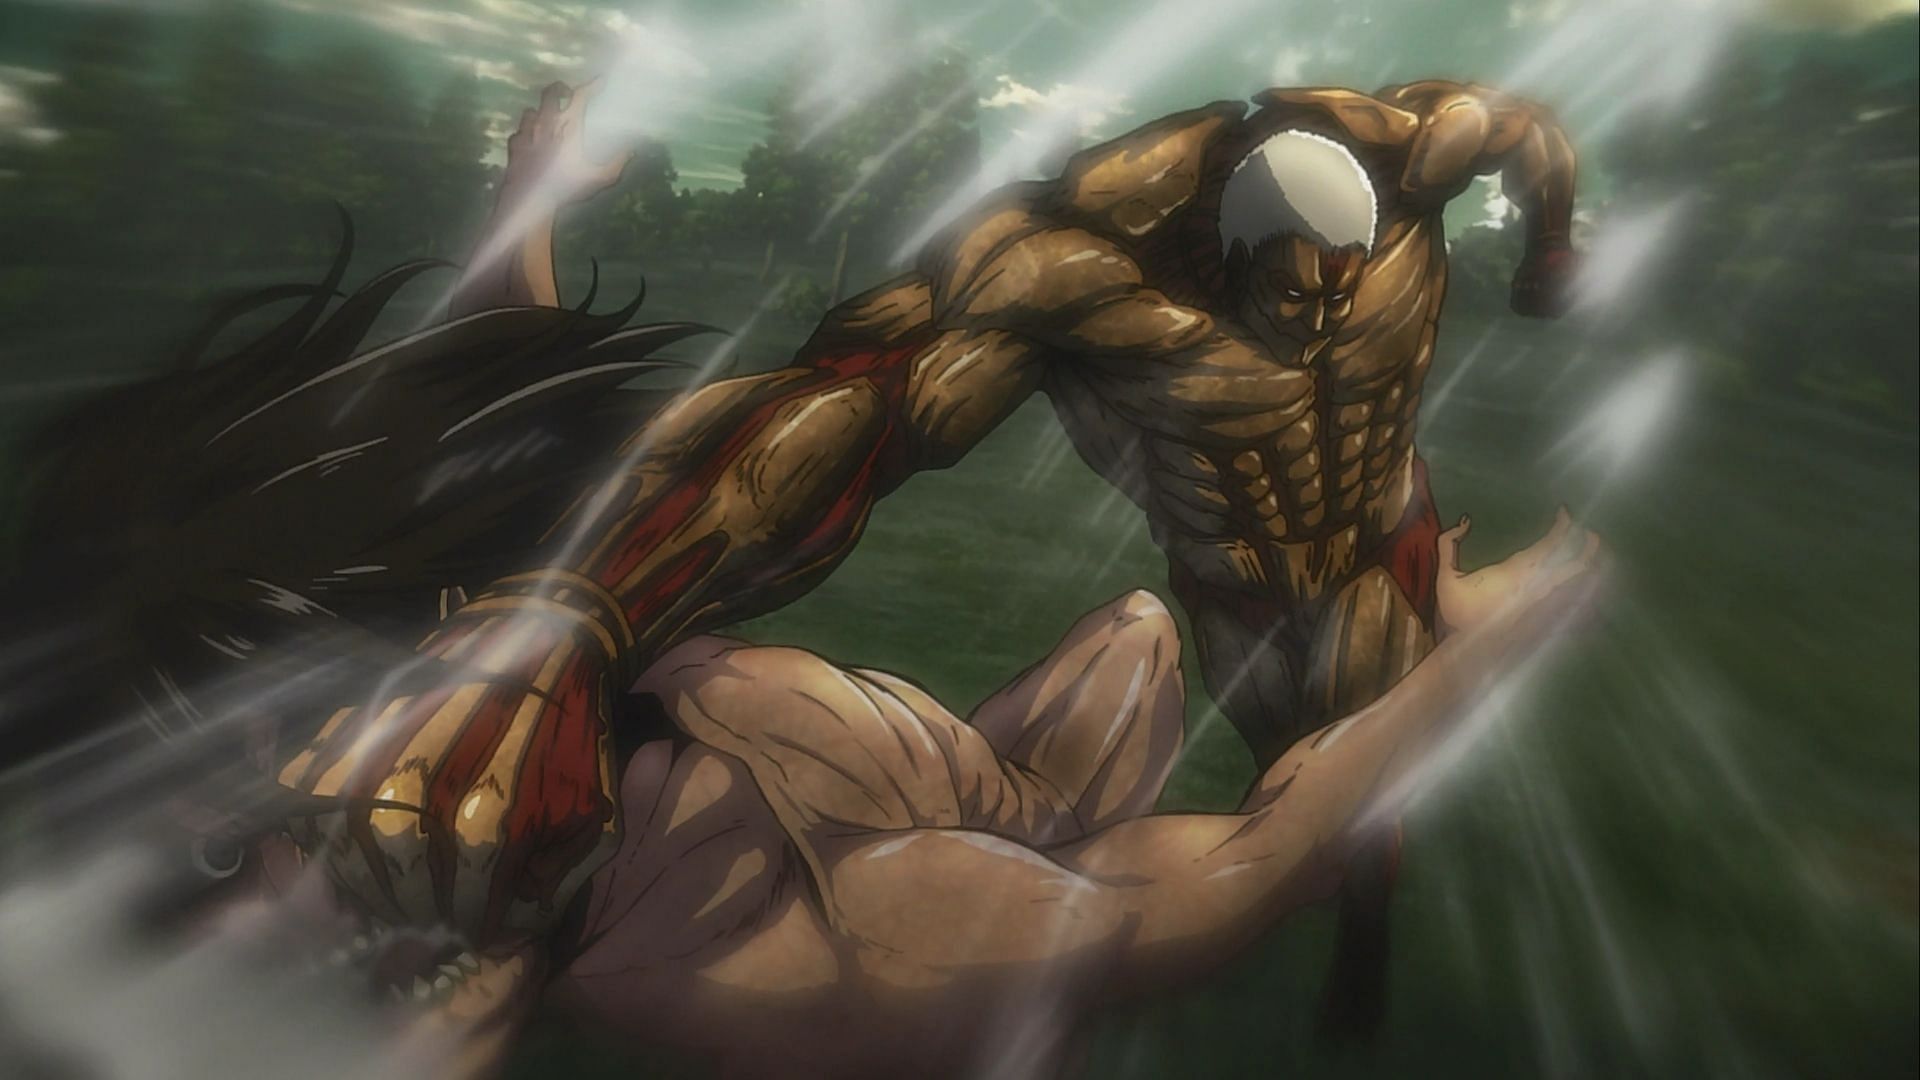 The Reason Behind Reiner Braun's Physical Appearance in Attack on